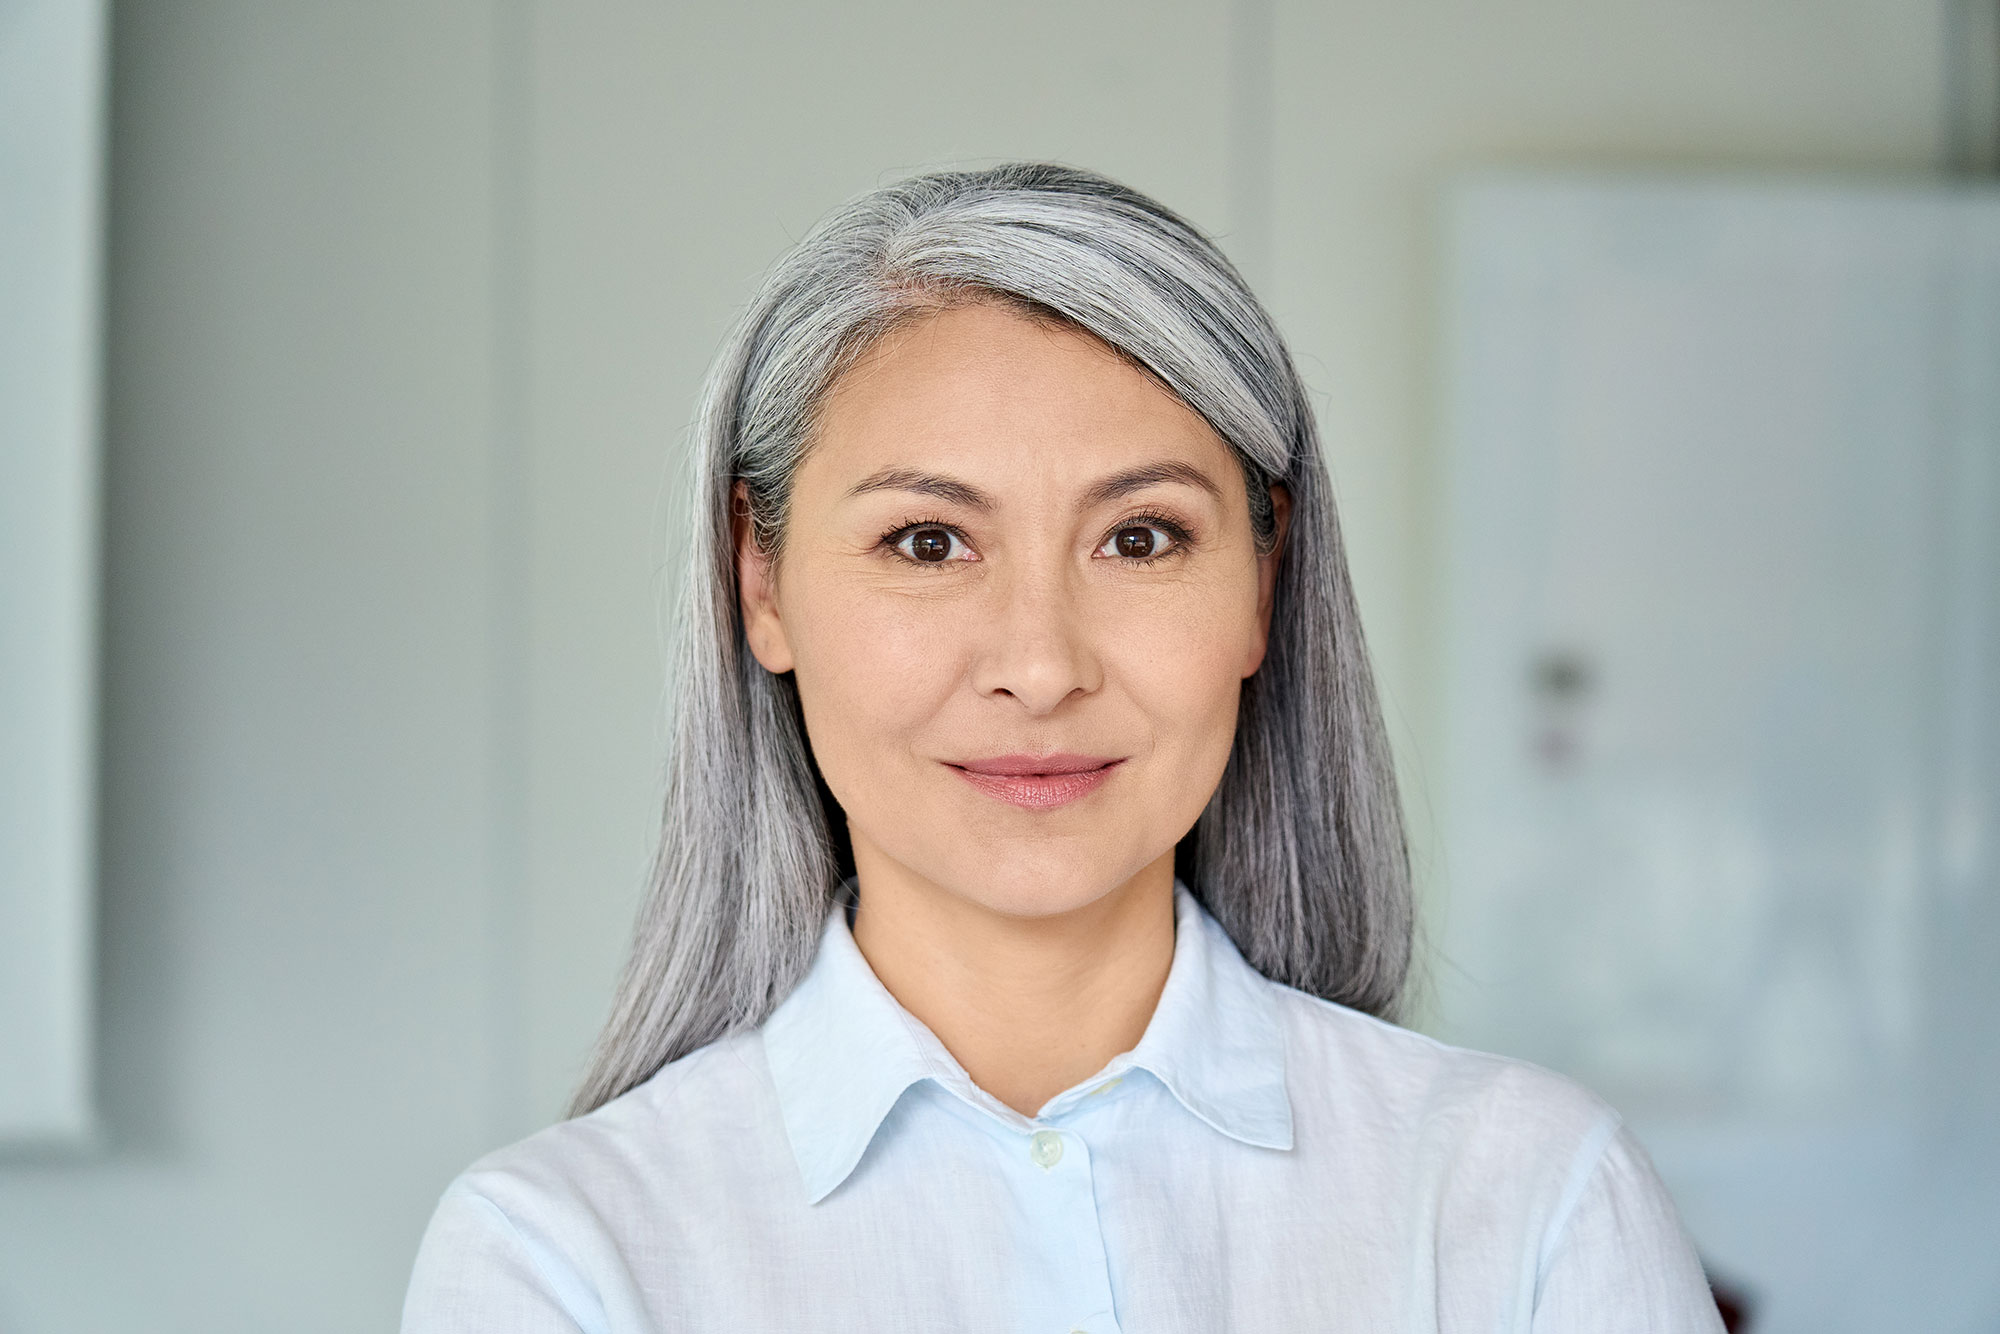 4. Blue Gray Hair: Embracing Your Natural Color - wide 8